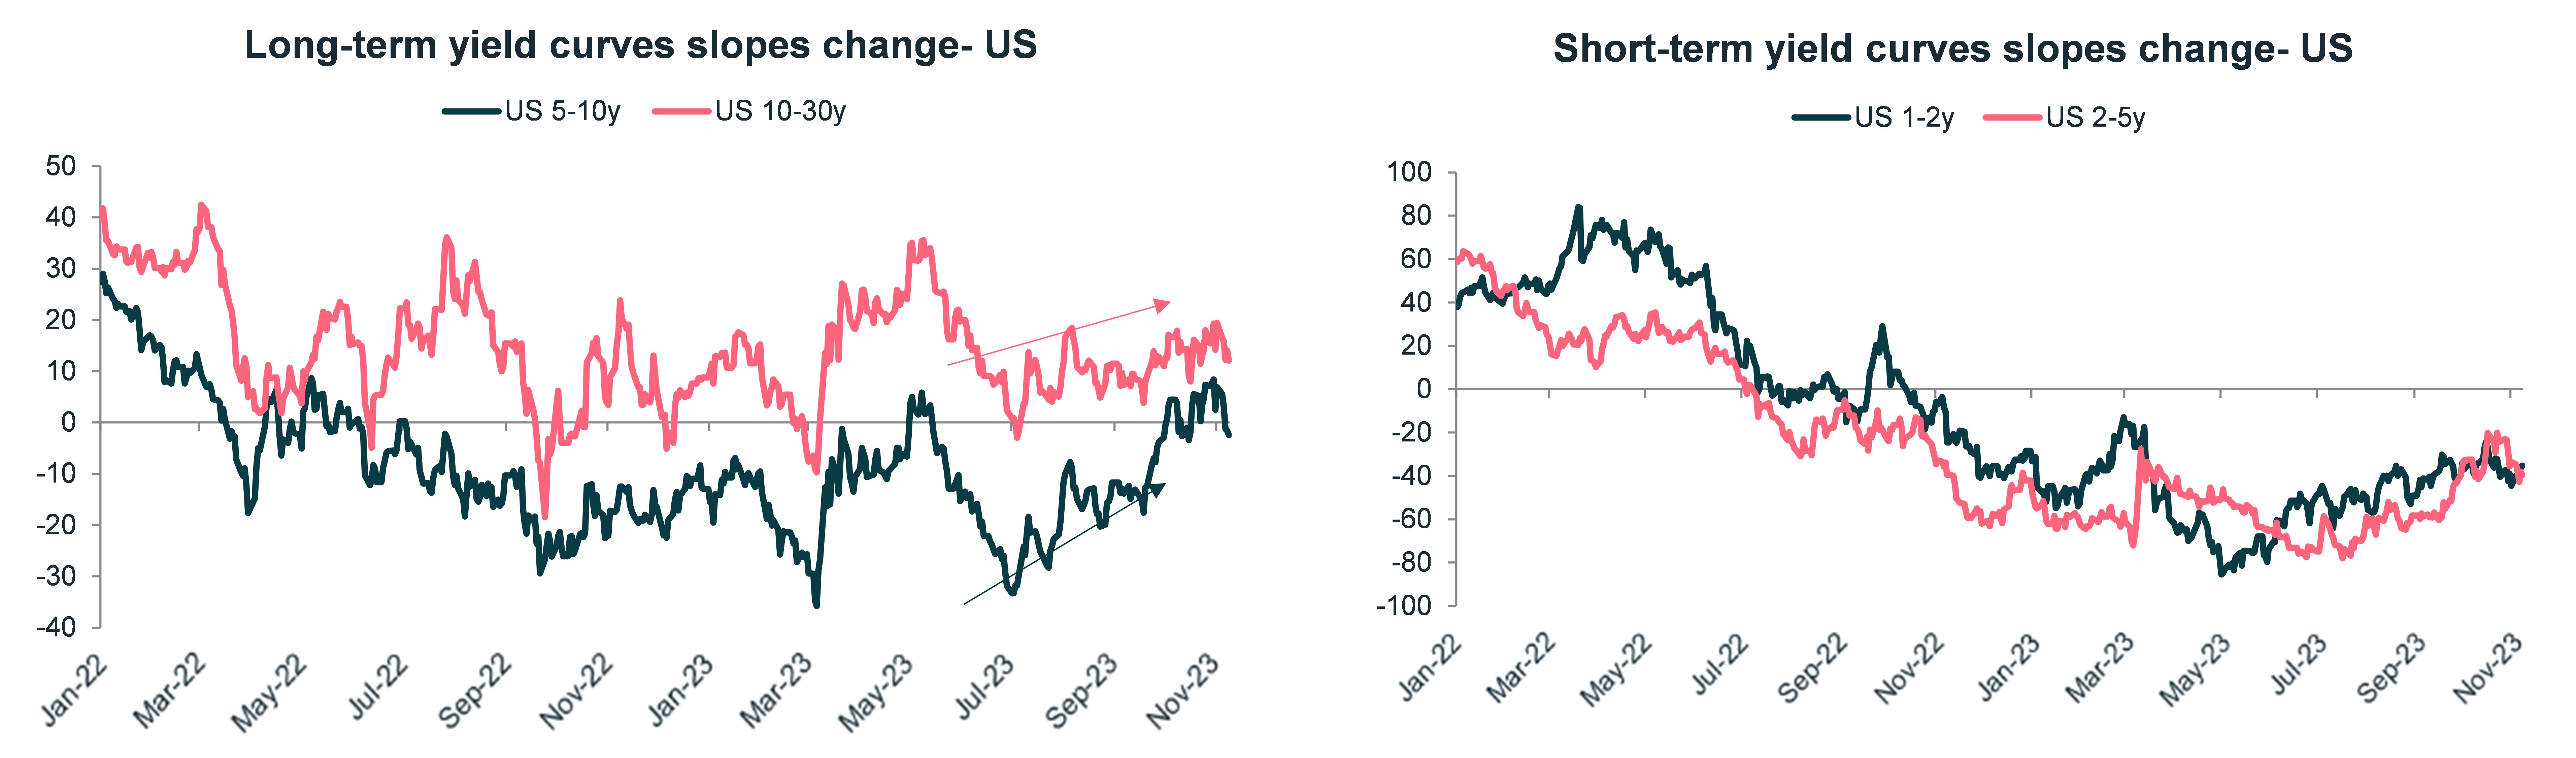 long-and-short-term-yield-curves-slopes-change-us